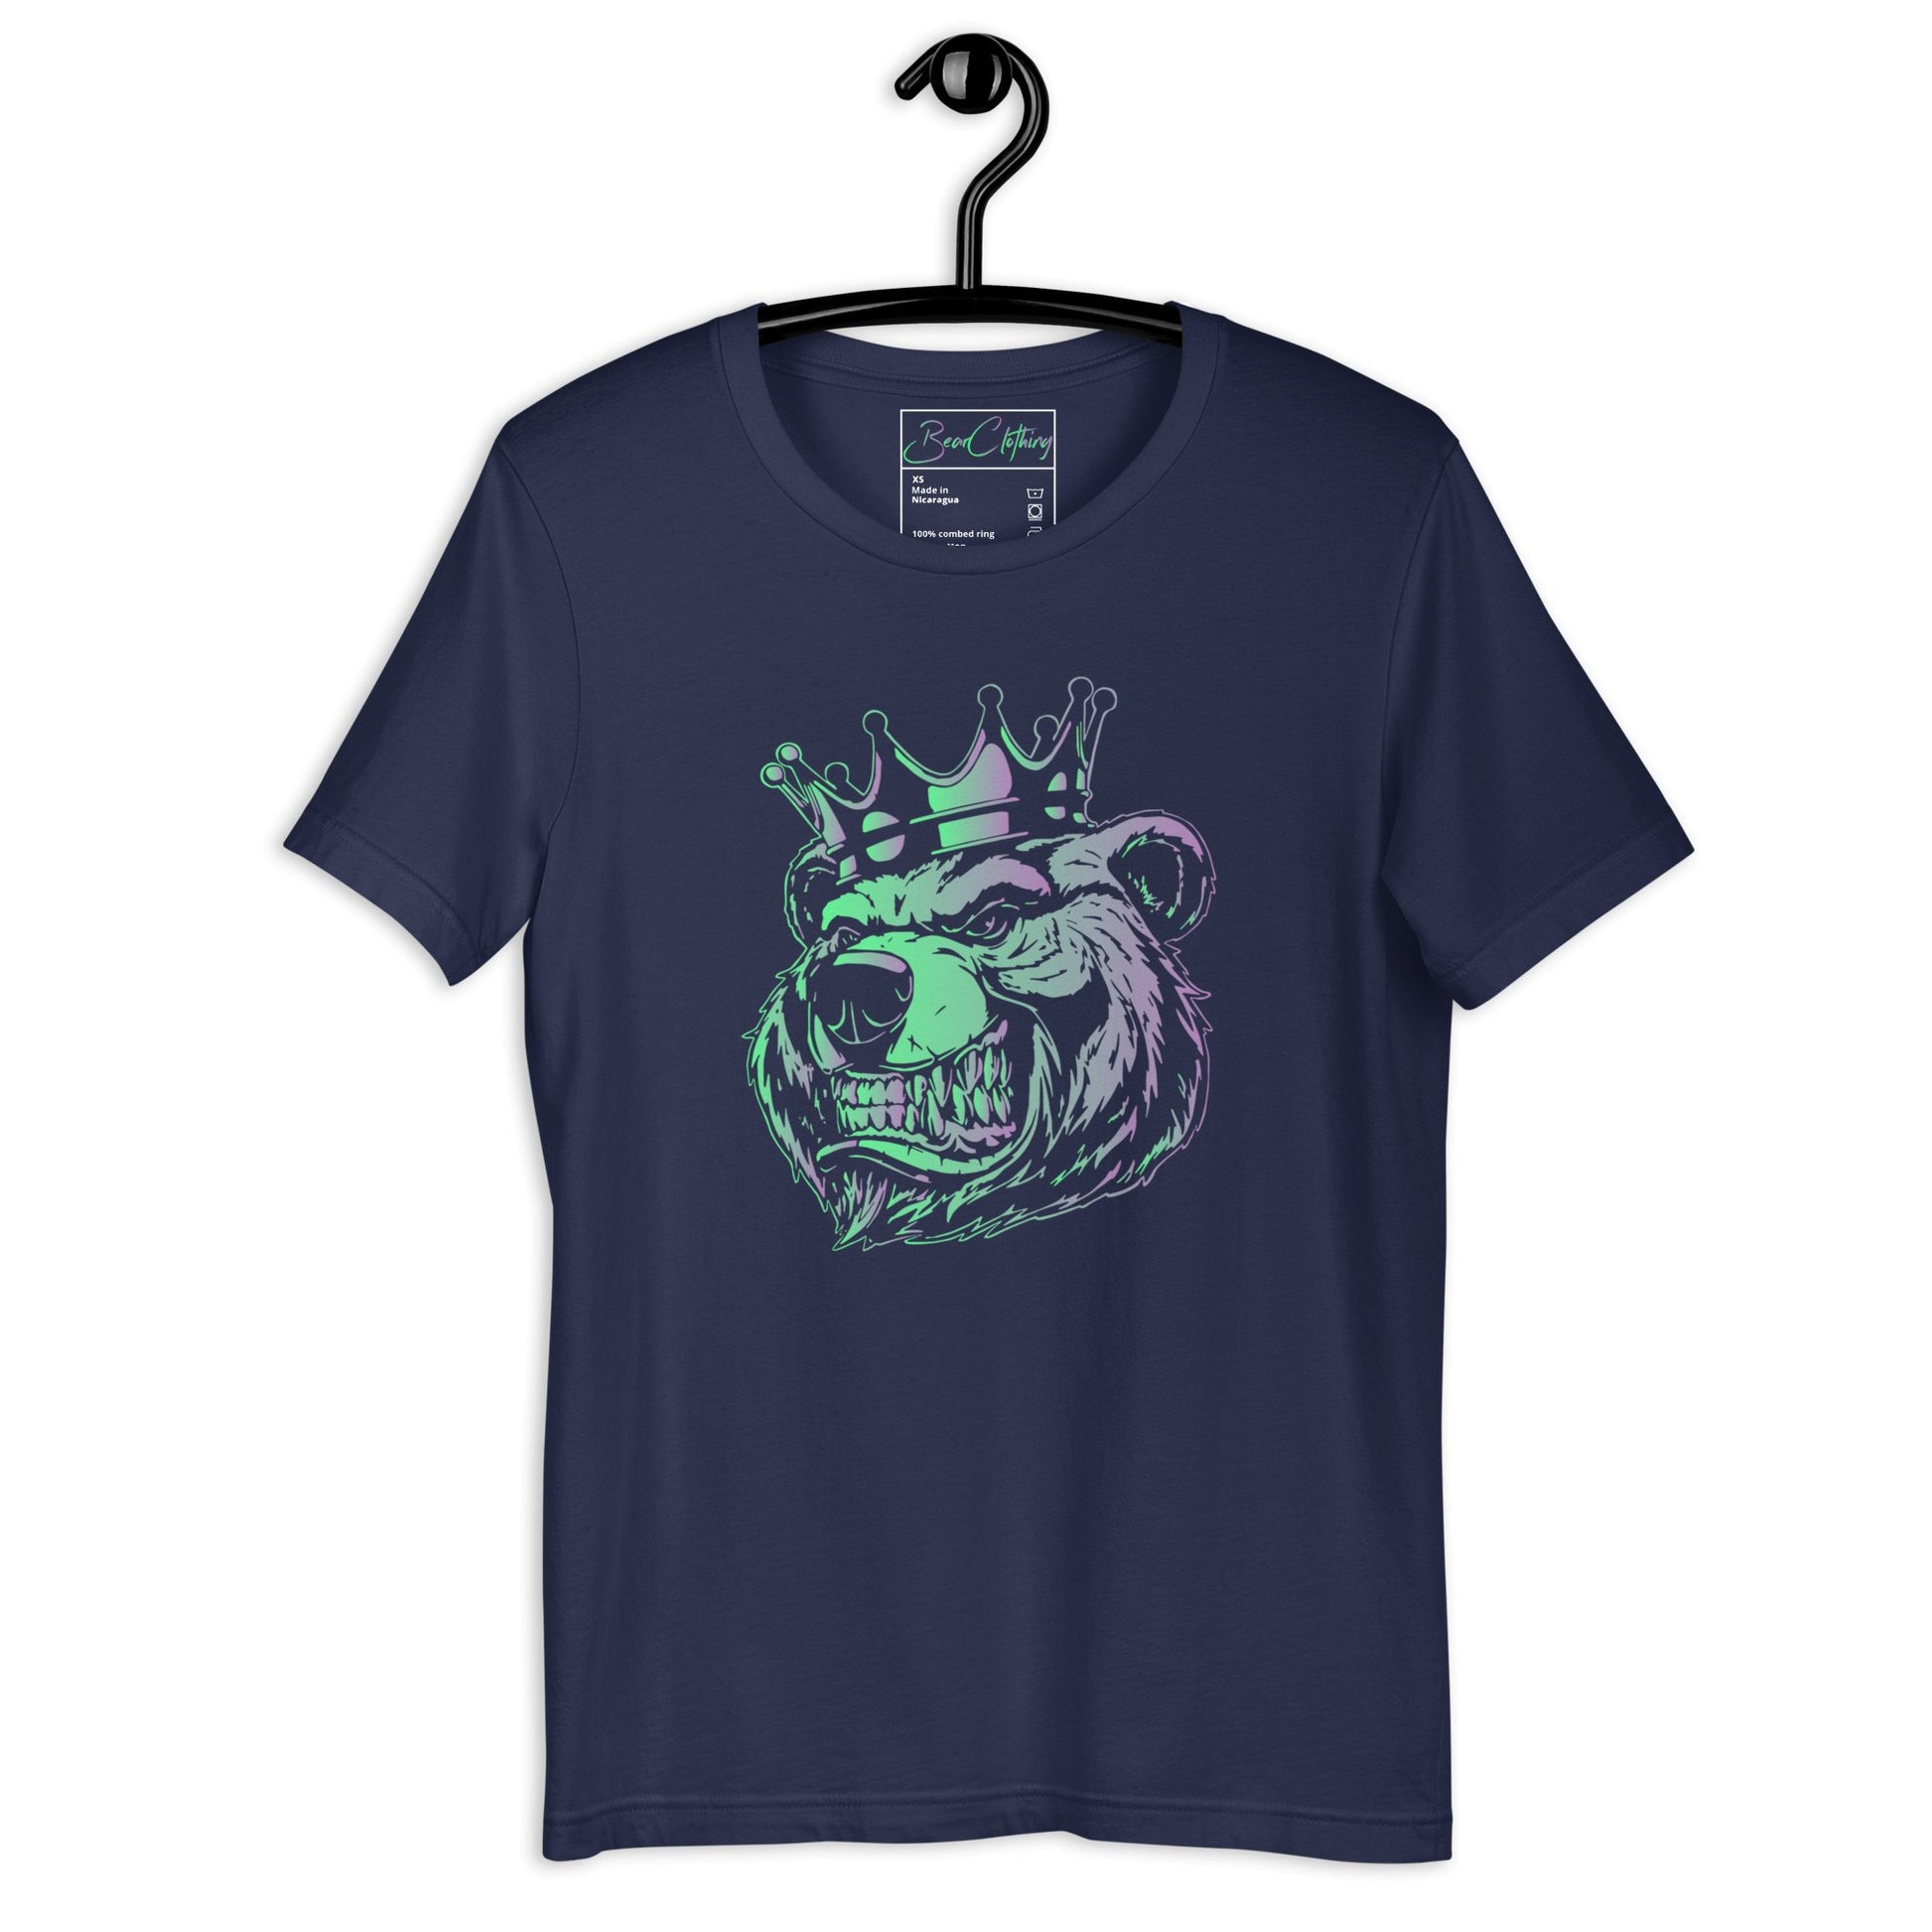 Multi-Colored Bear with Crown Print Tee - Bearclothing